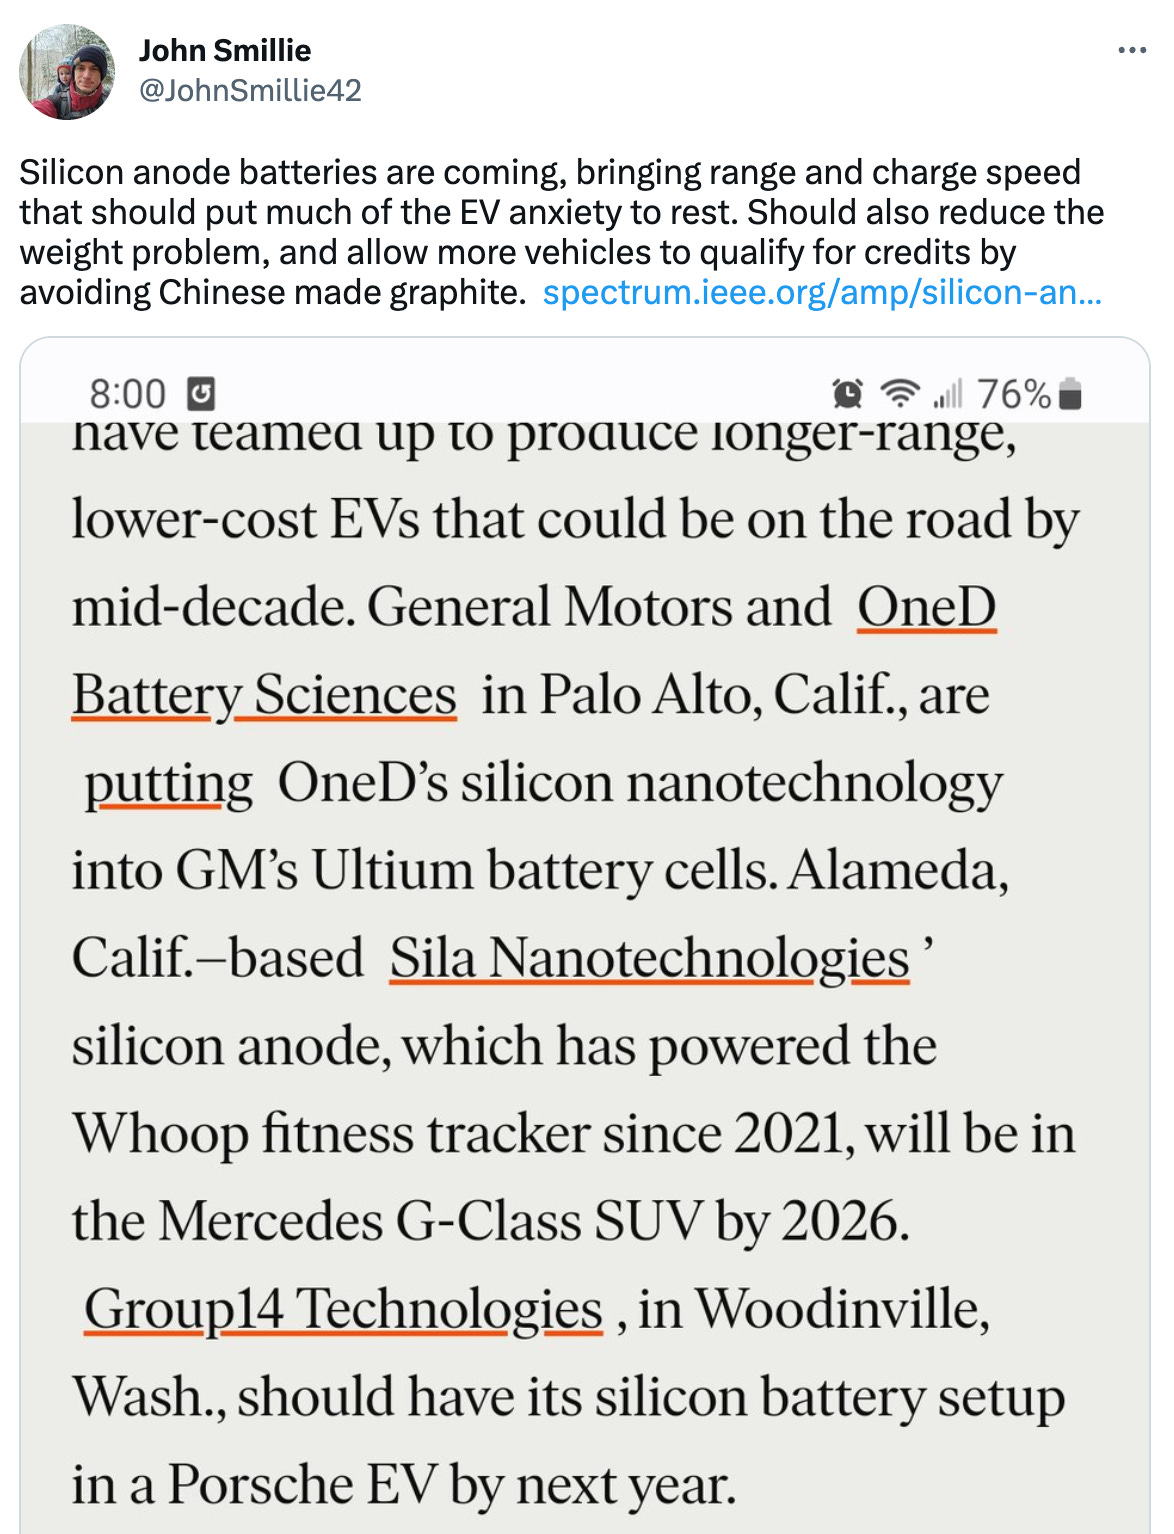  See new Tweets Conversation John Smillie @JohnSmillie42 Silicon anode batteries are coming, bringing range and charge speed that should put much of the EV anxiety to rest. Should also reduce the weight problem, and allow more vehicles to qualify for credits by avoiding Chinese made graphite.  https://spectrum.ieee.org/amp/silicon-anode-battery-2659927950